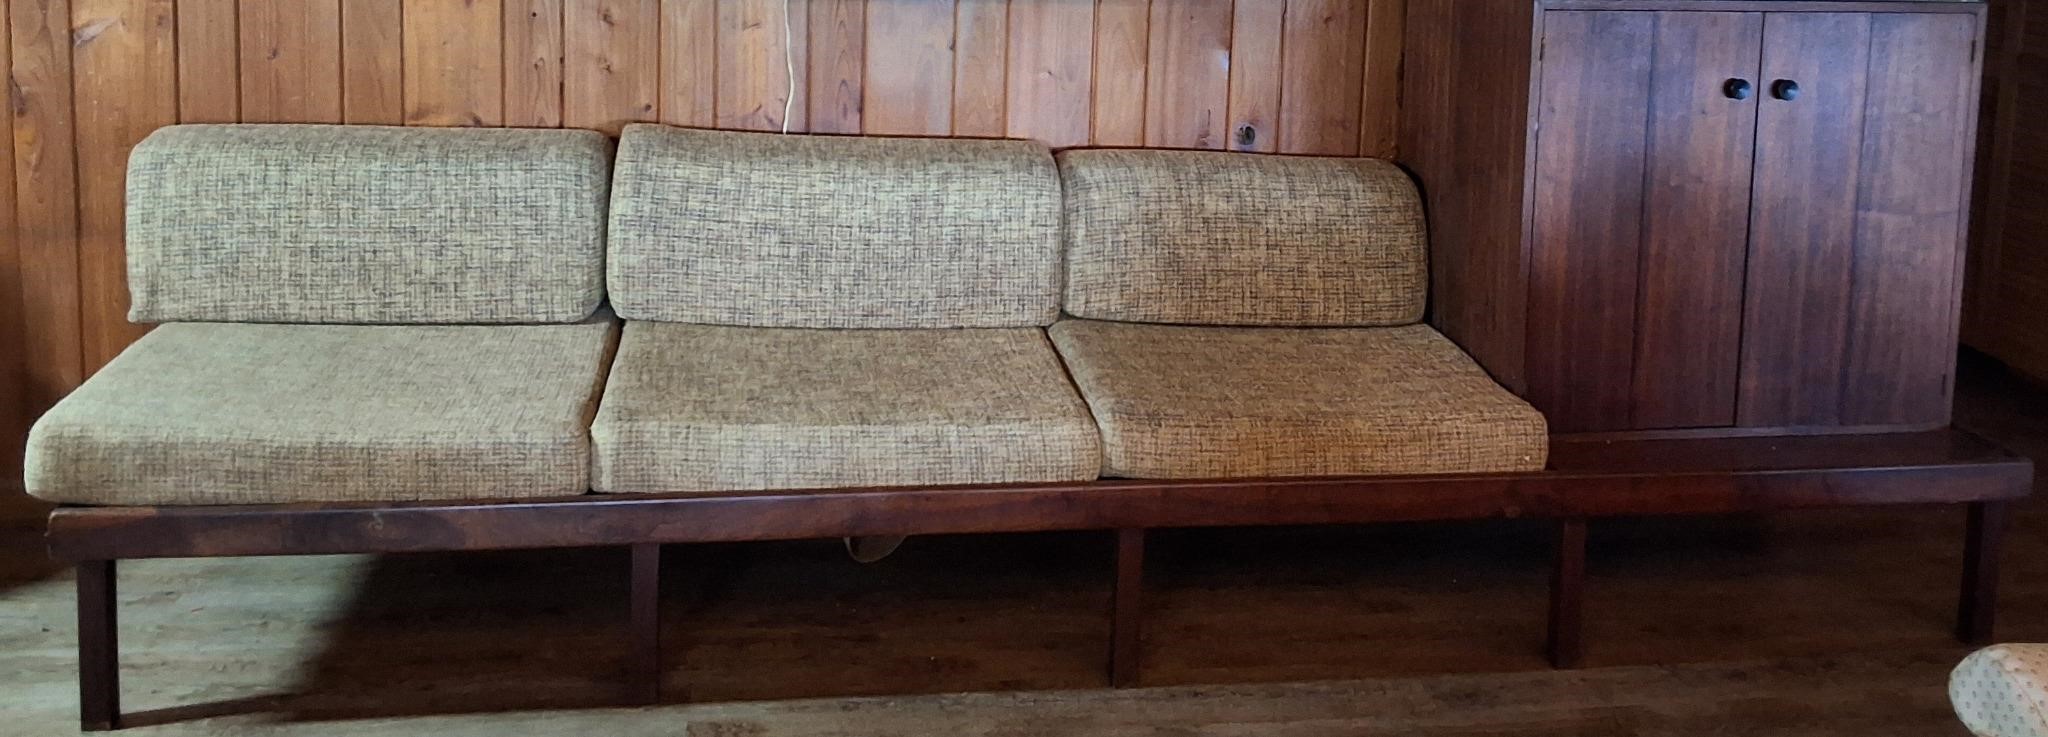 MCM Style Handmade Couch & Cabinet